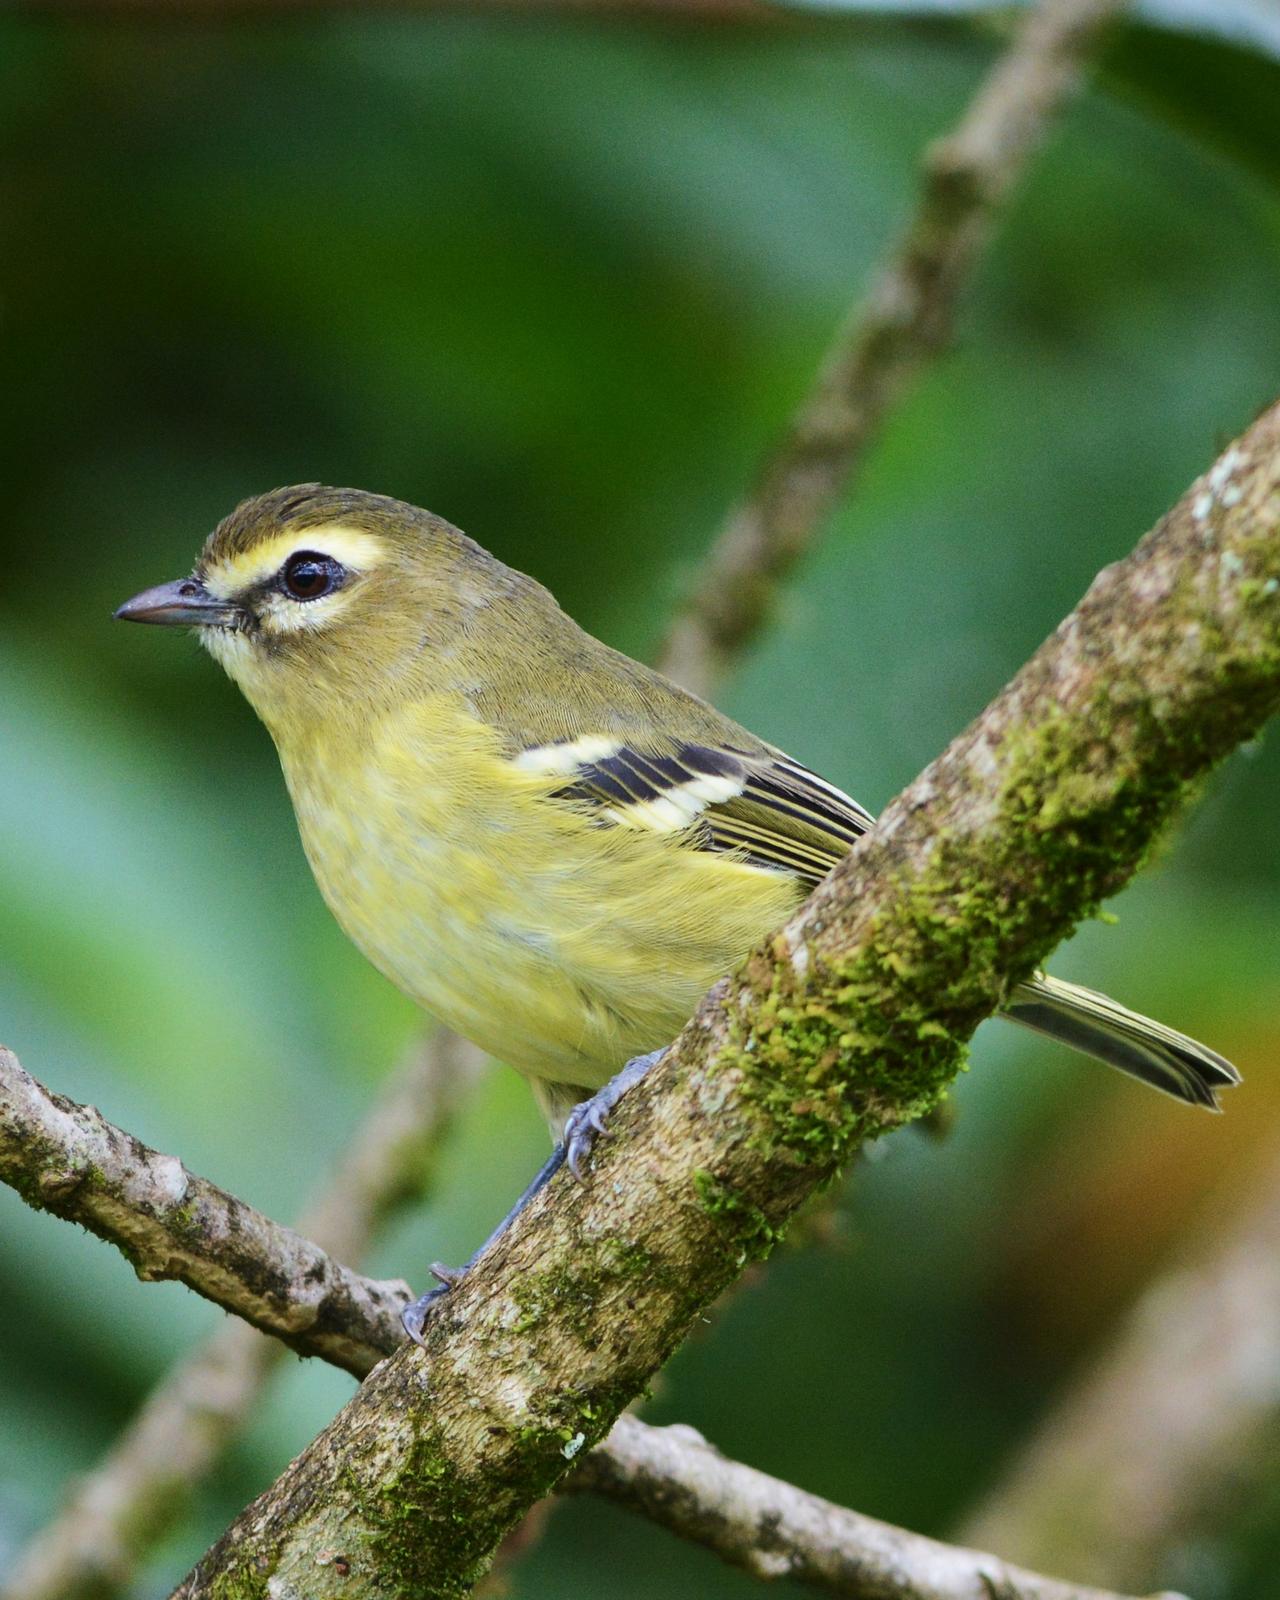 Yellow-winged Vireo Photo by David Hollie